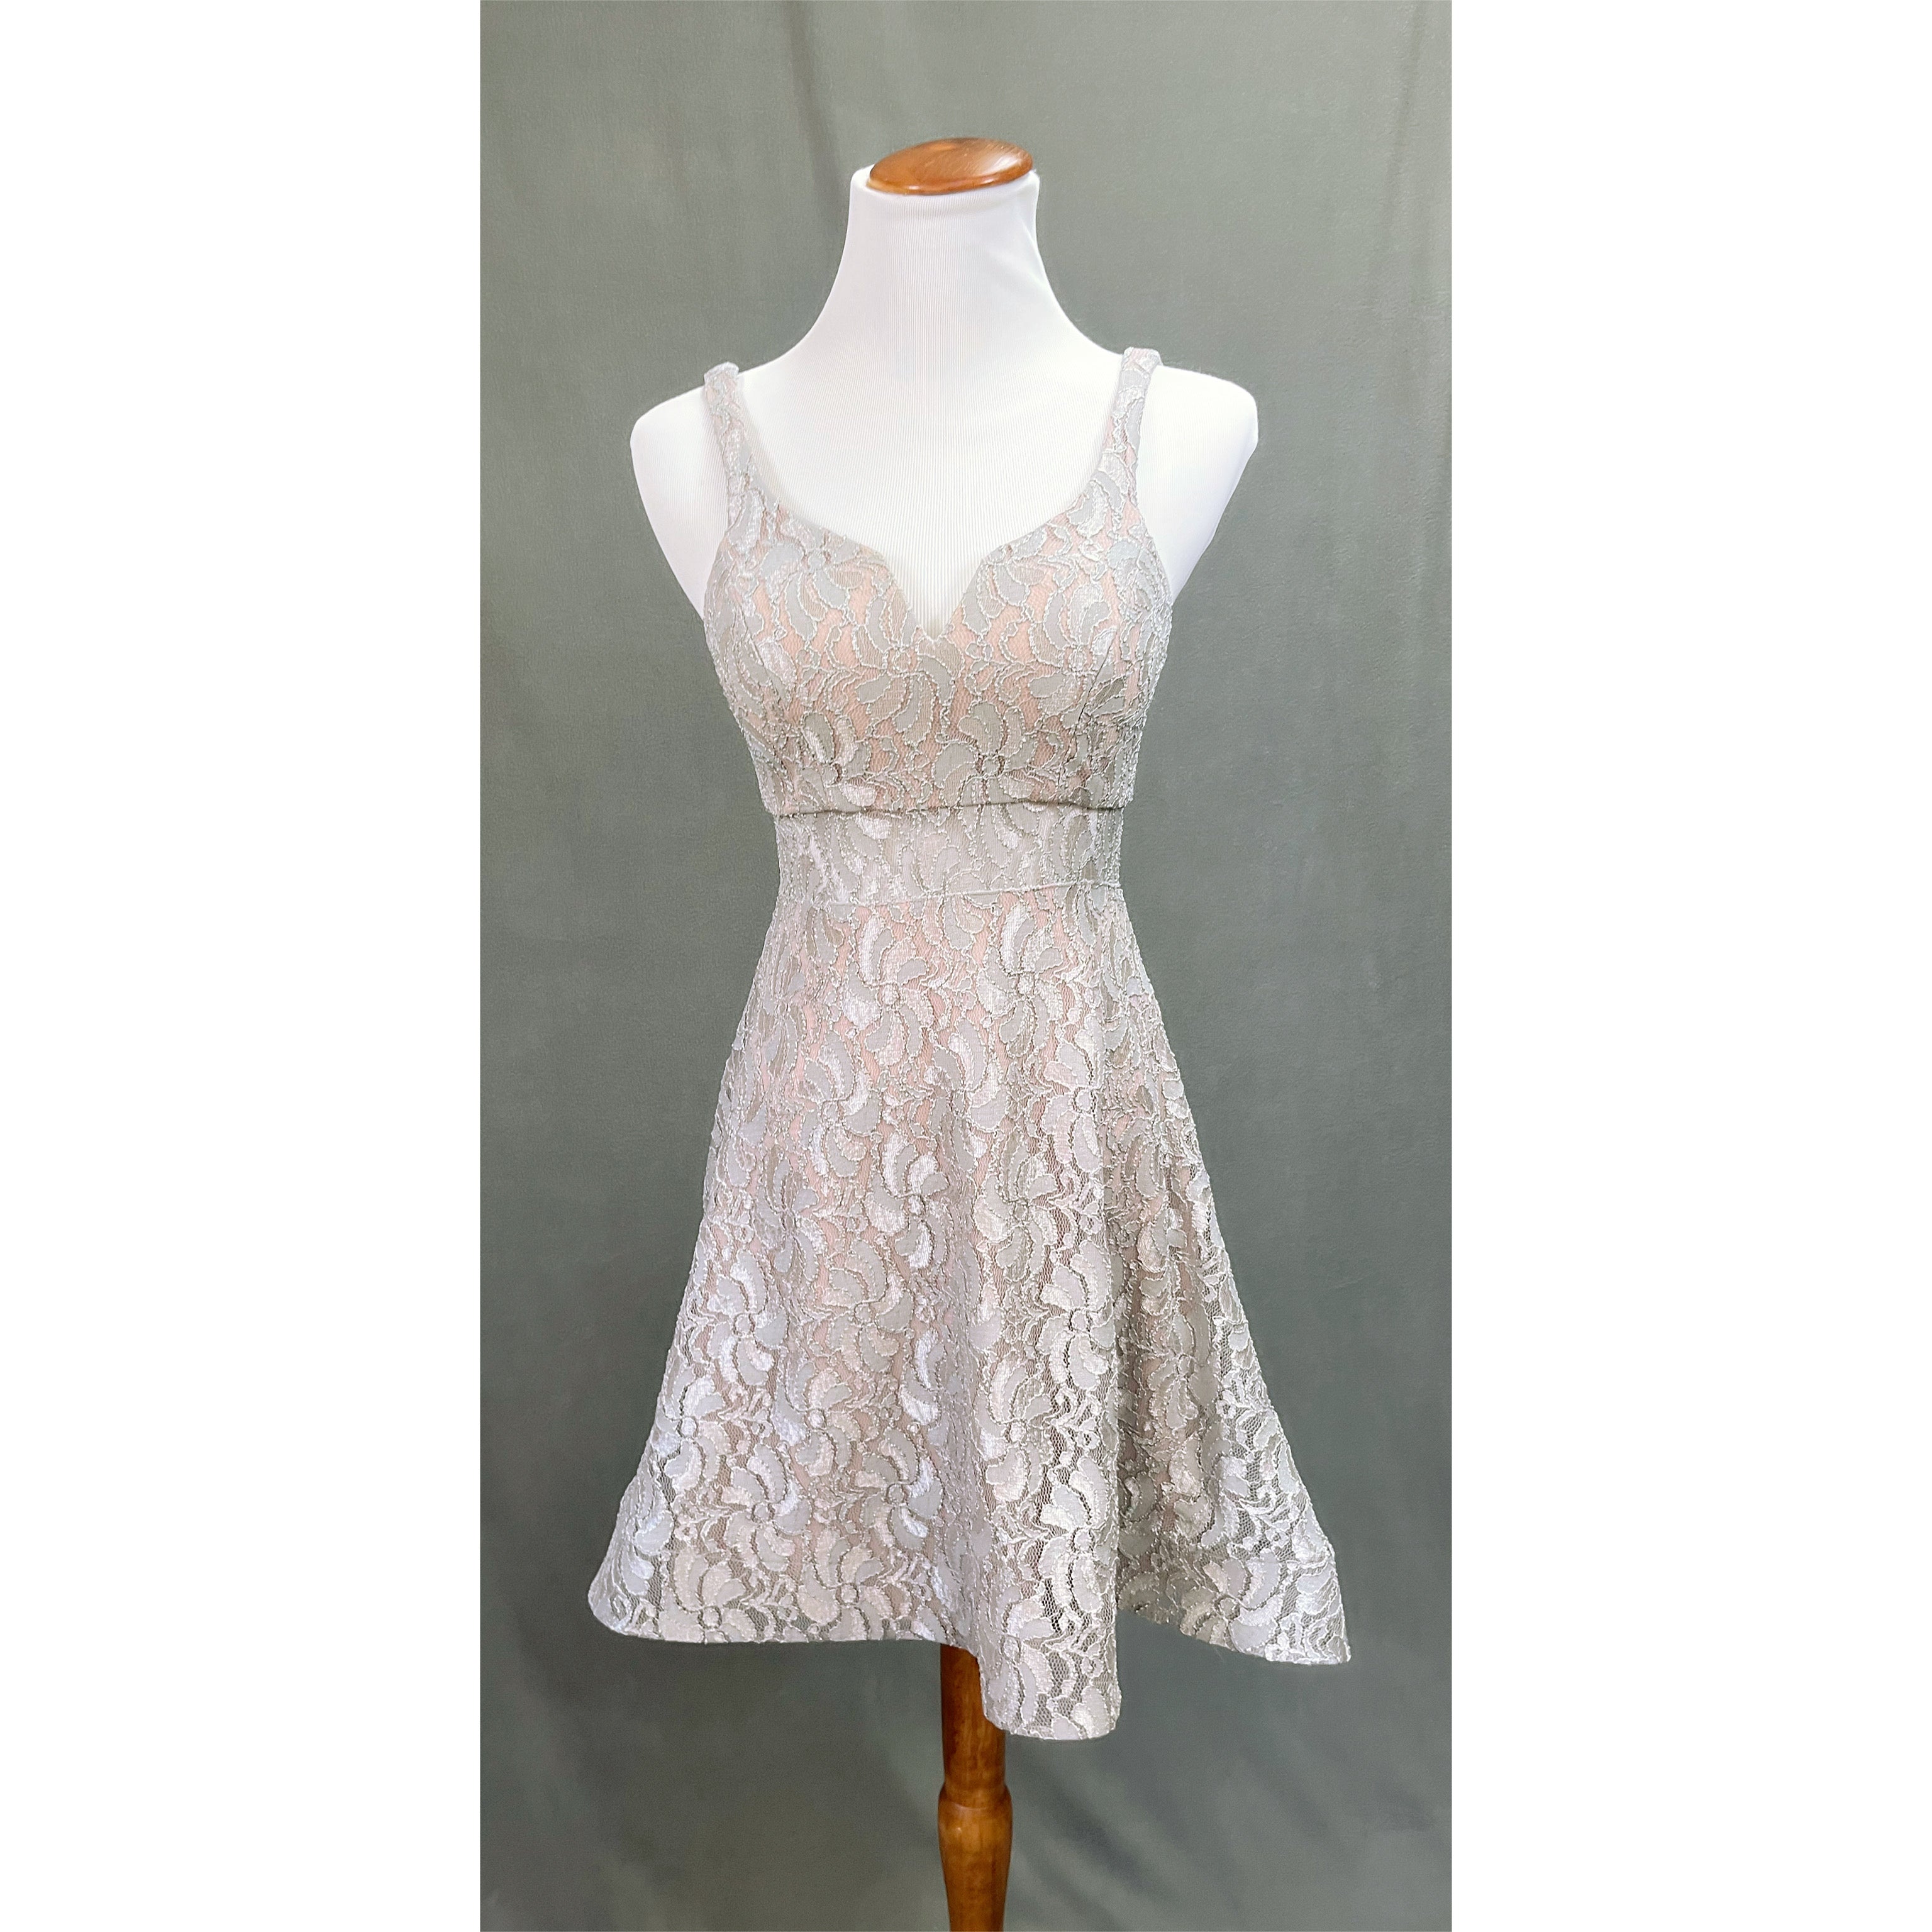 Sequin Hearts silver lace dress, size 1